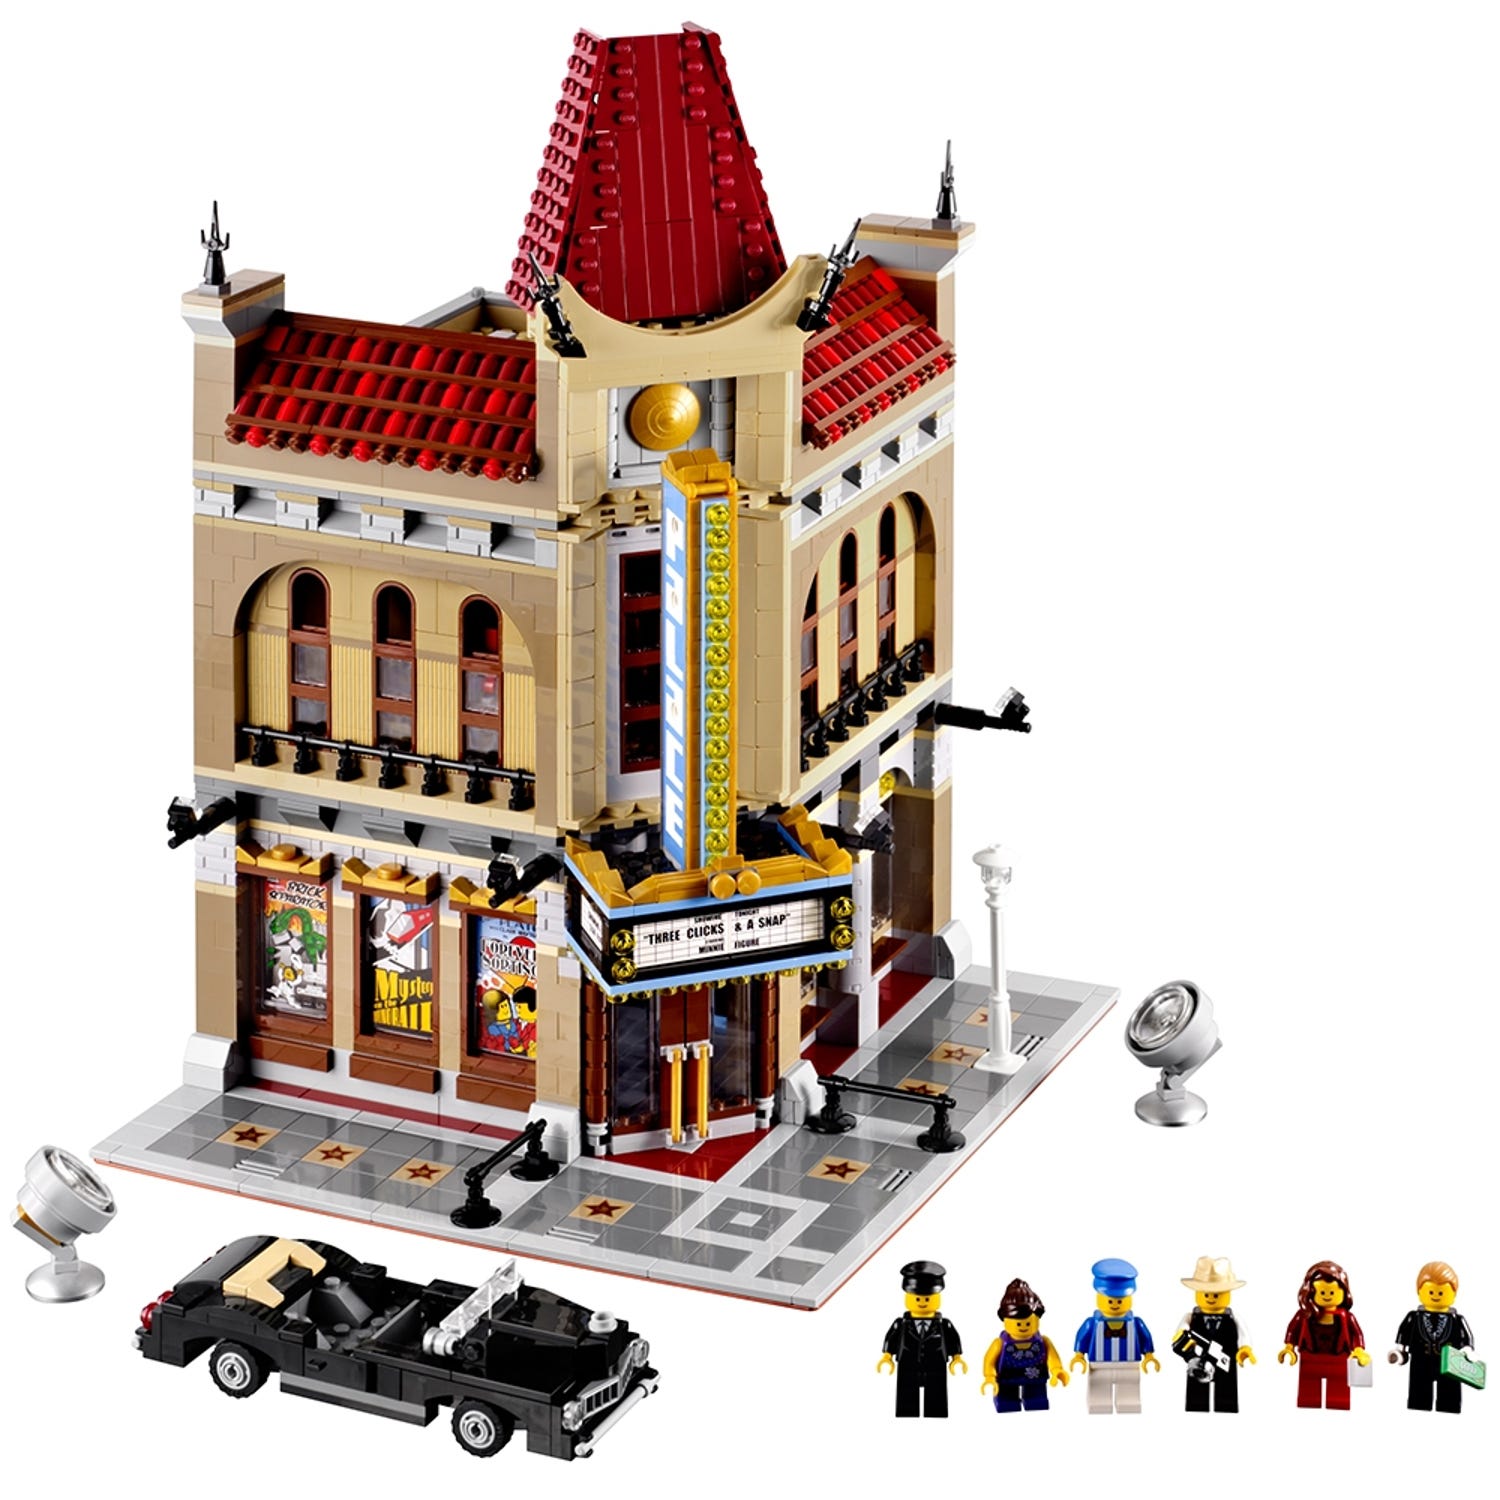 LEGO Creator Expert: Palace Cinema (10232) for sale online